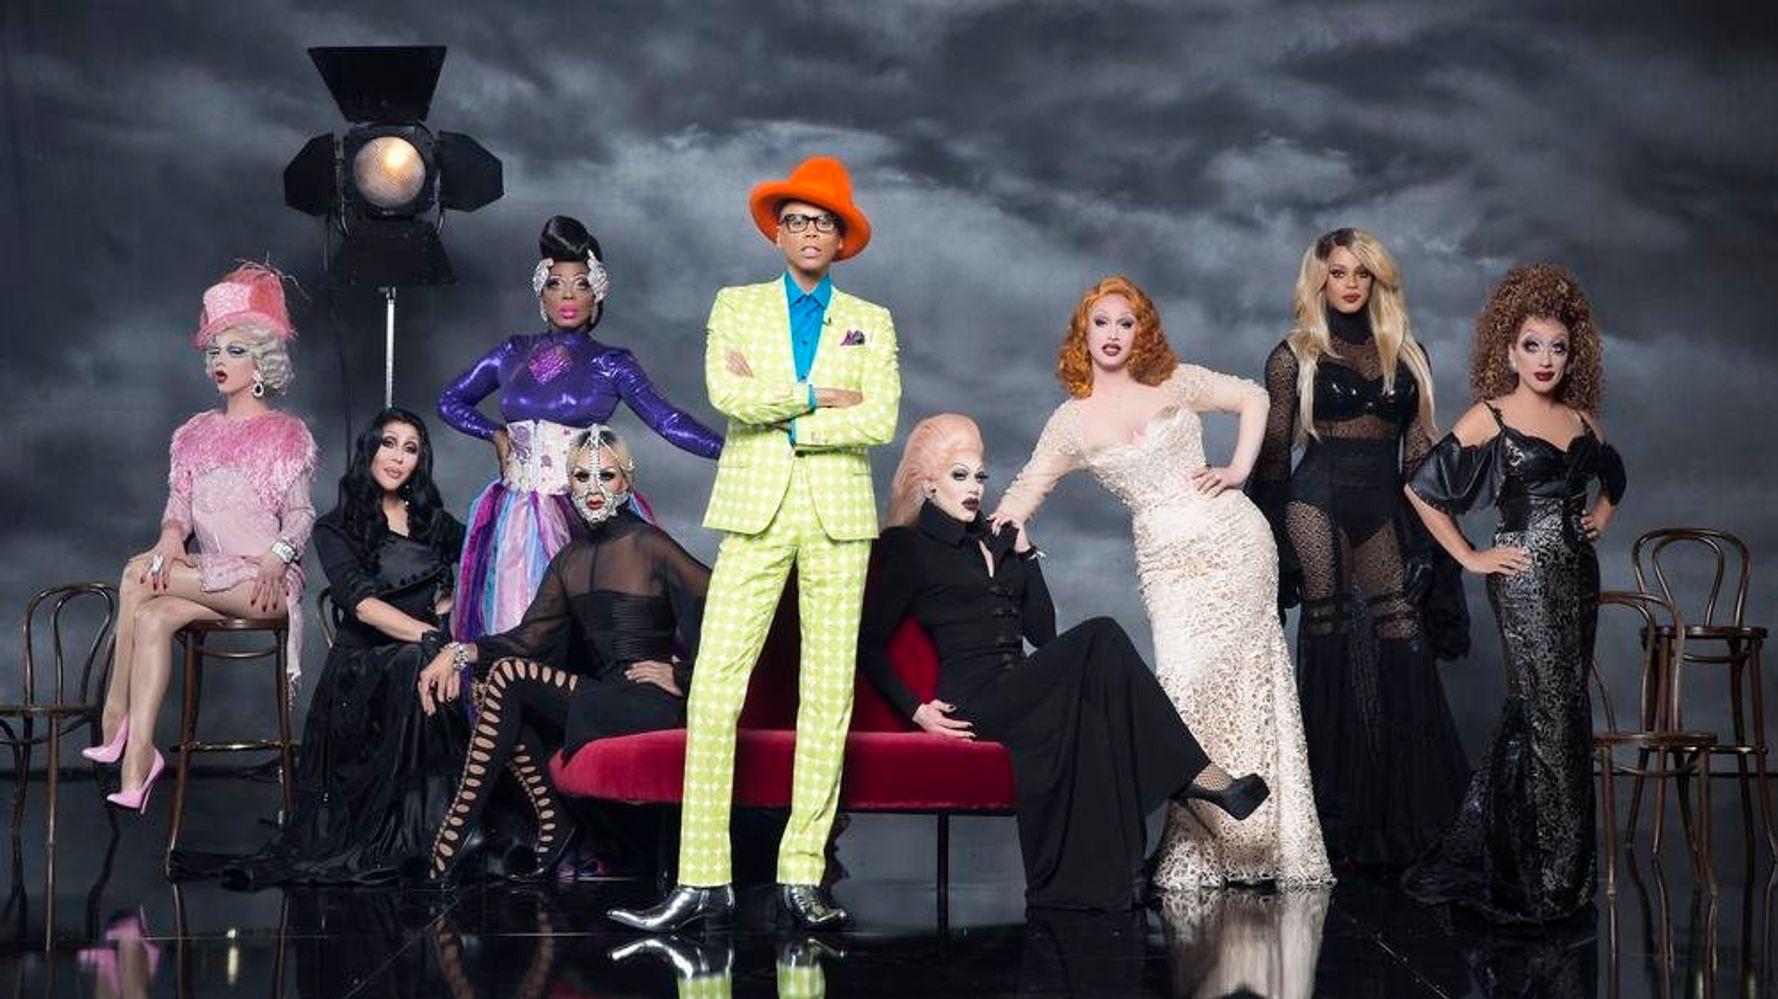 Catching Up With The Winners Of 'RuPaul's Drag Race'